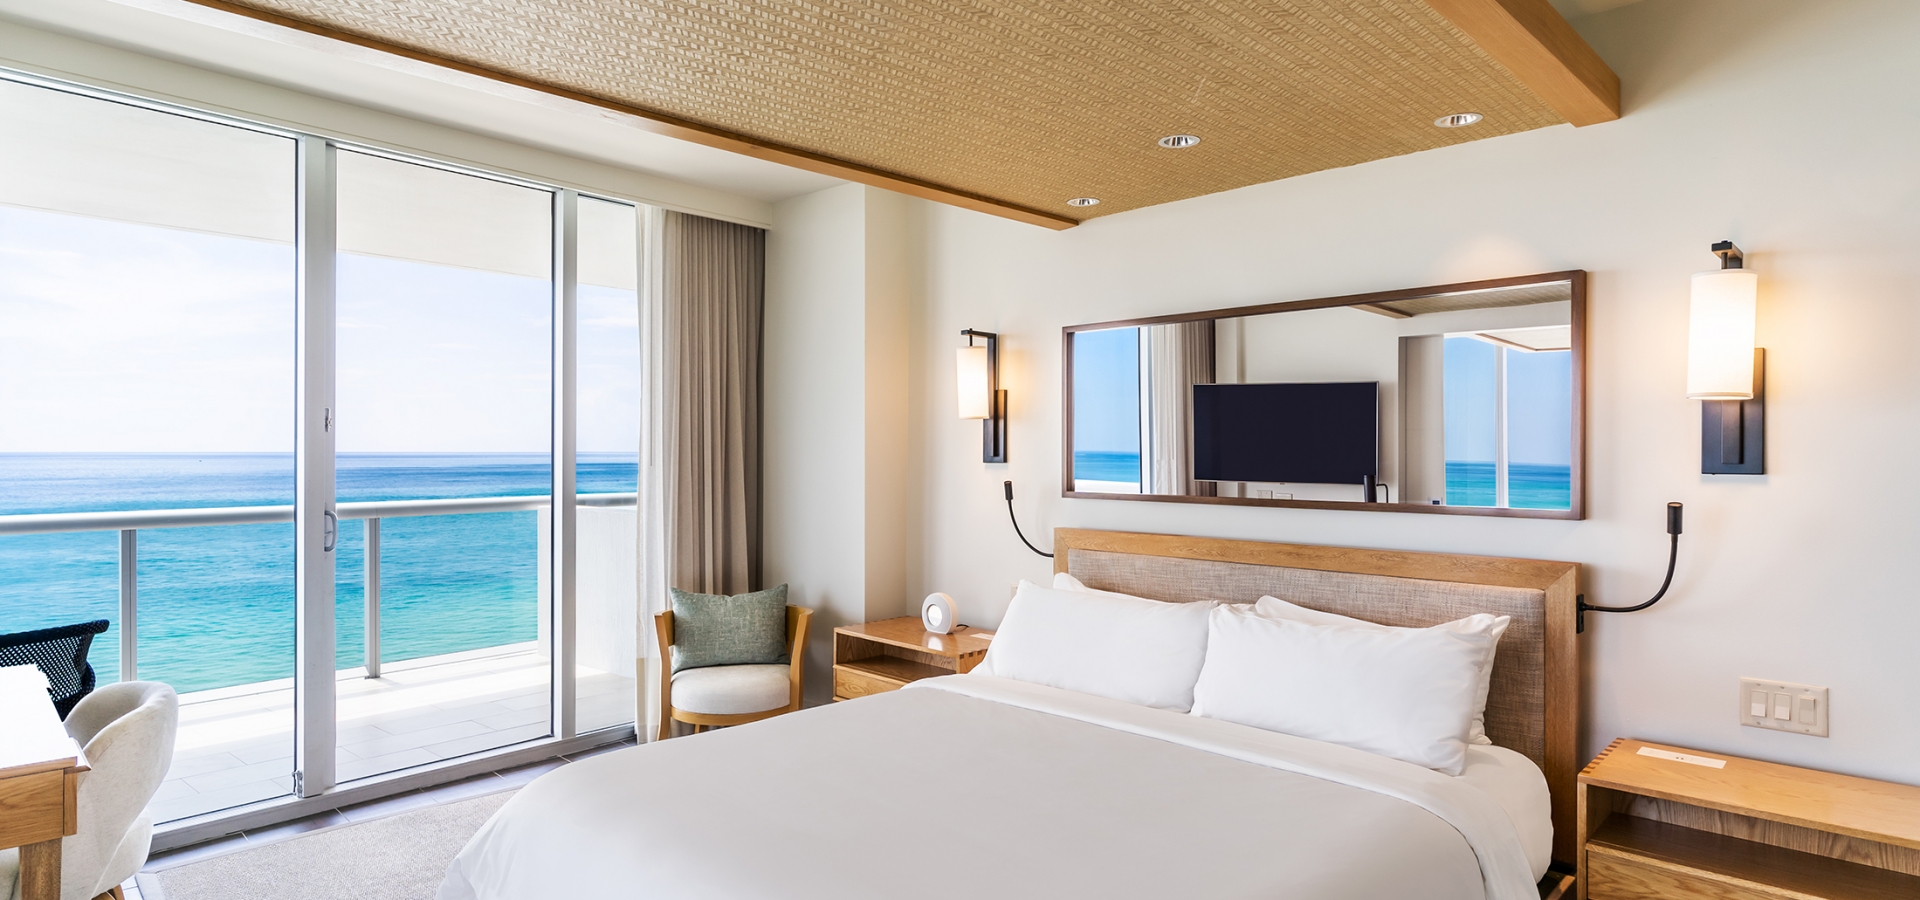 Bed from an Oceanfront Suite at Eden Roc